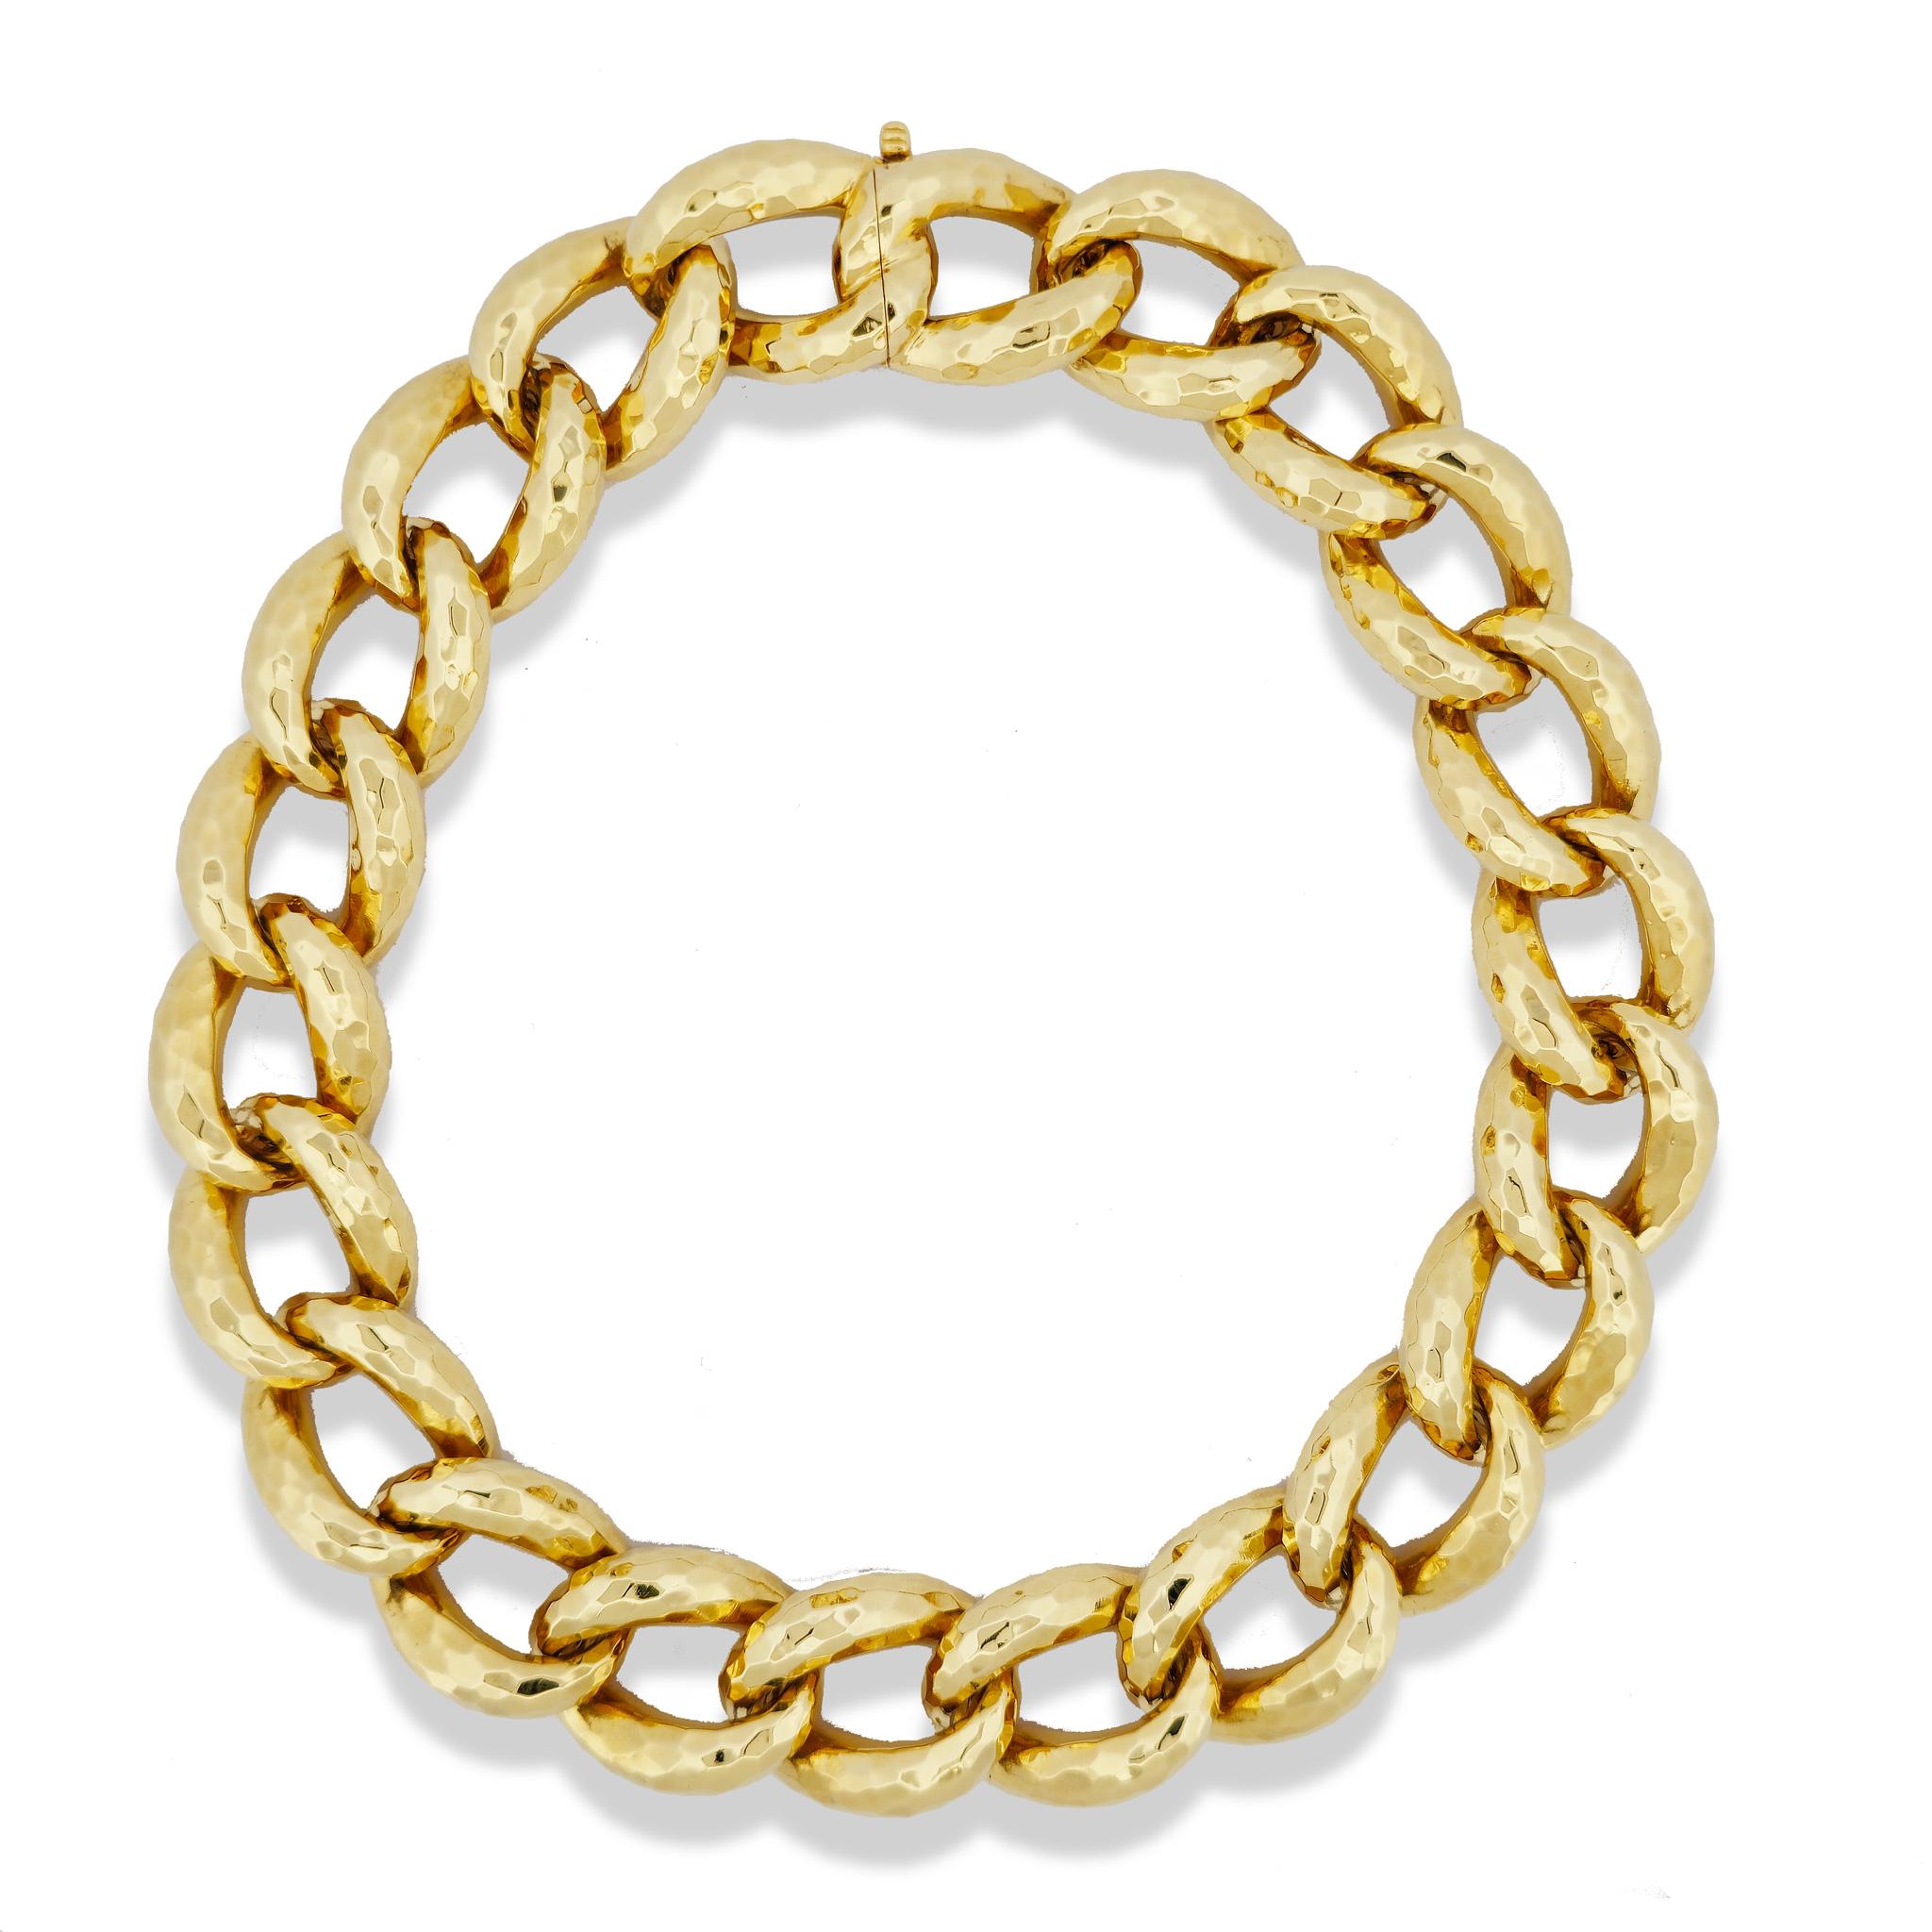 Adorn yourself with the stunning and remarkable Henry Dunay 18 Karat Yellow Gold Cynabar Faceted Curb Link Necklace. 

This estate piece from the 1980's features a 22.40 mm width and 16